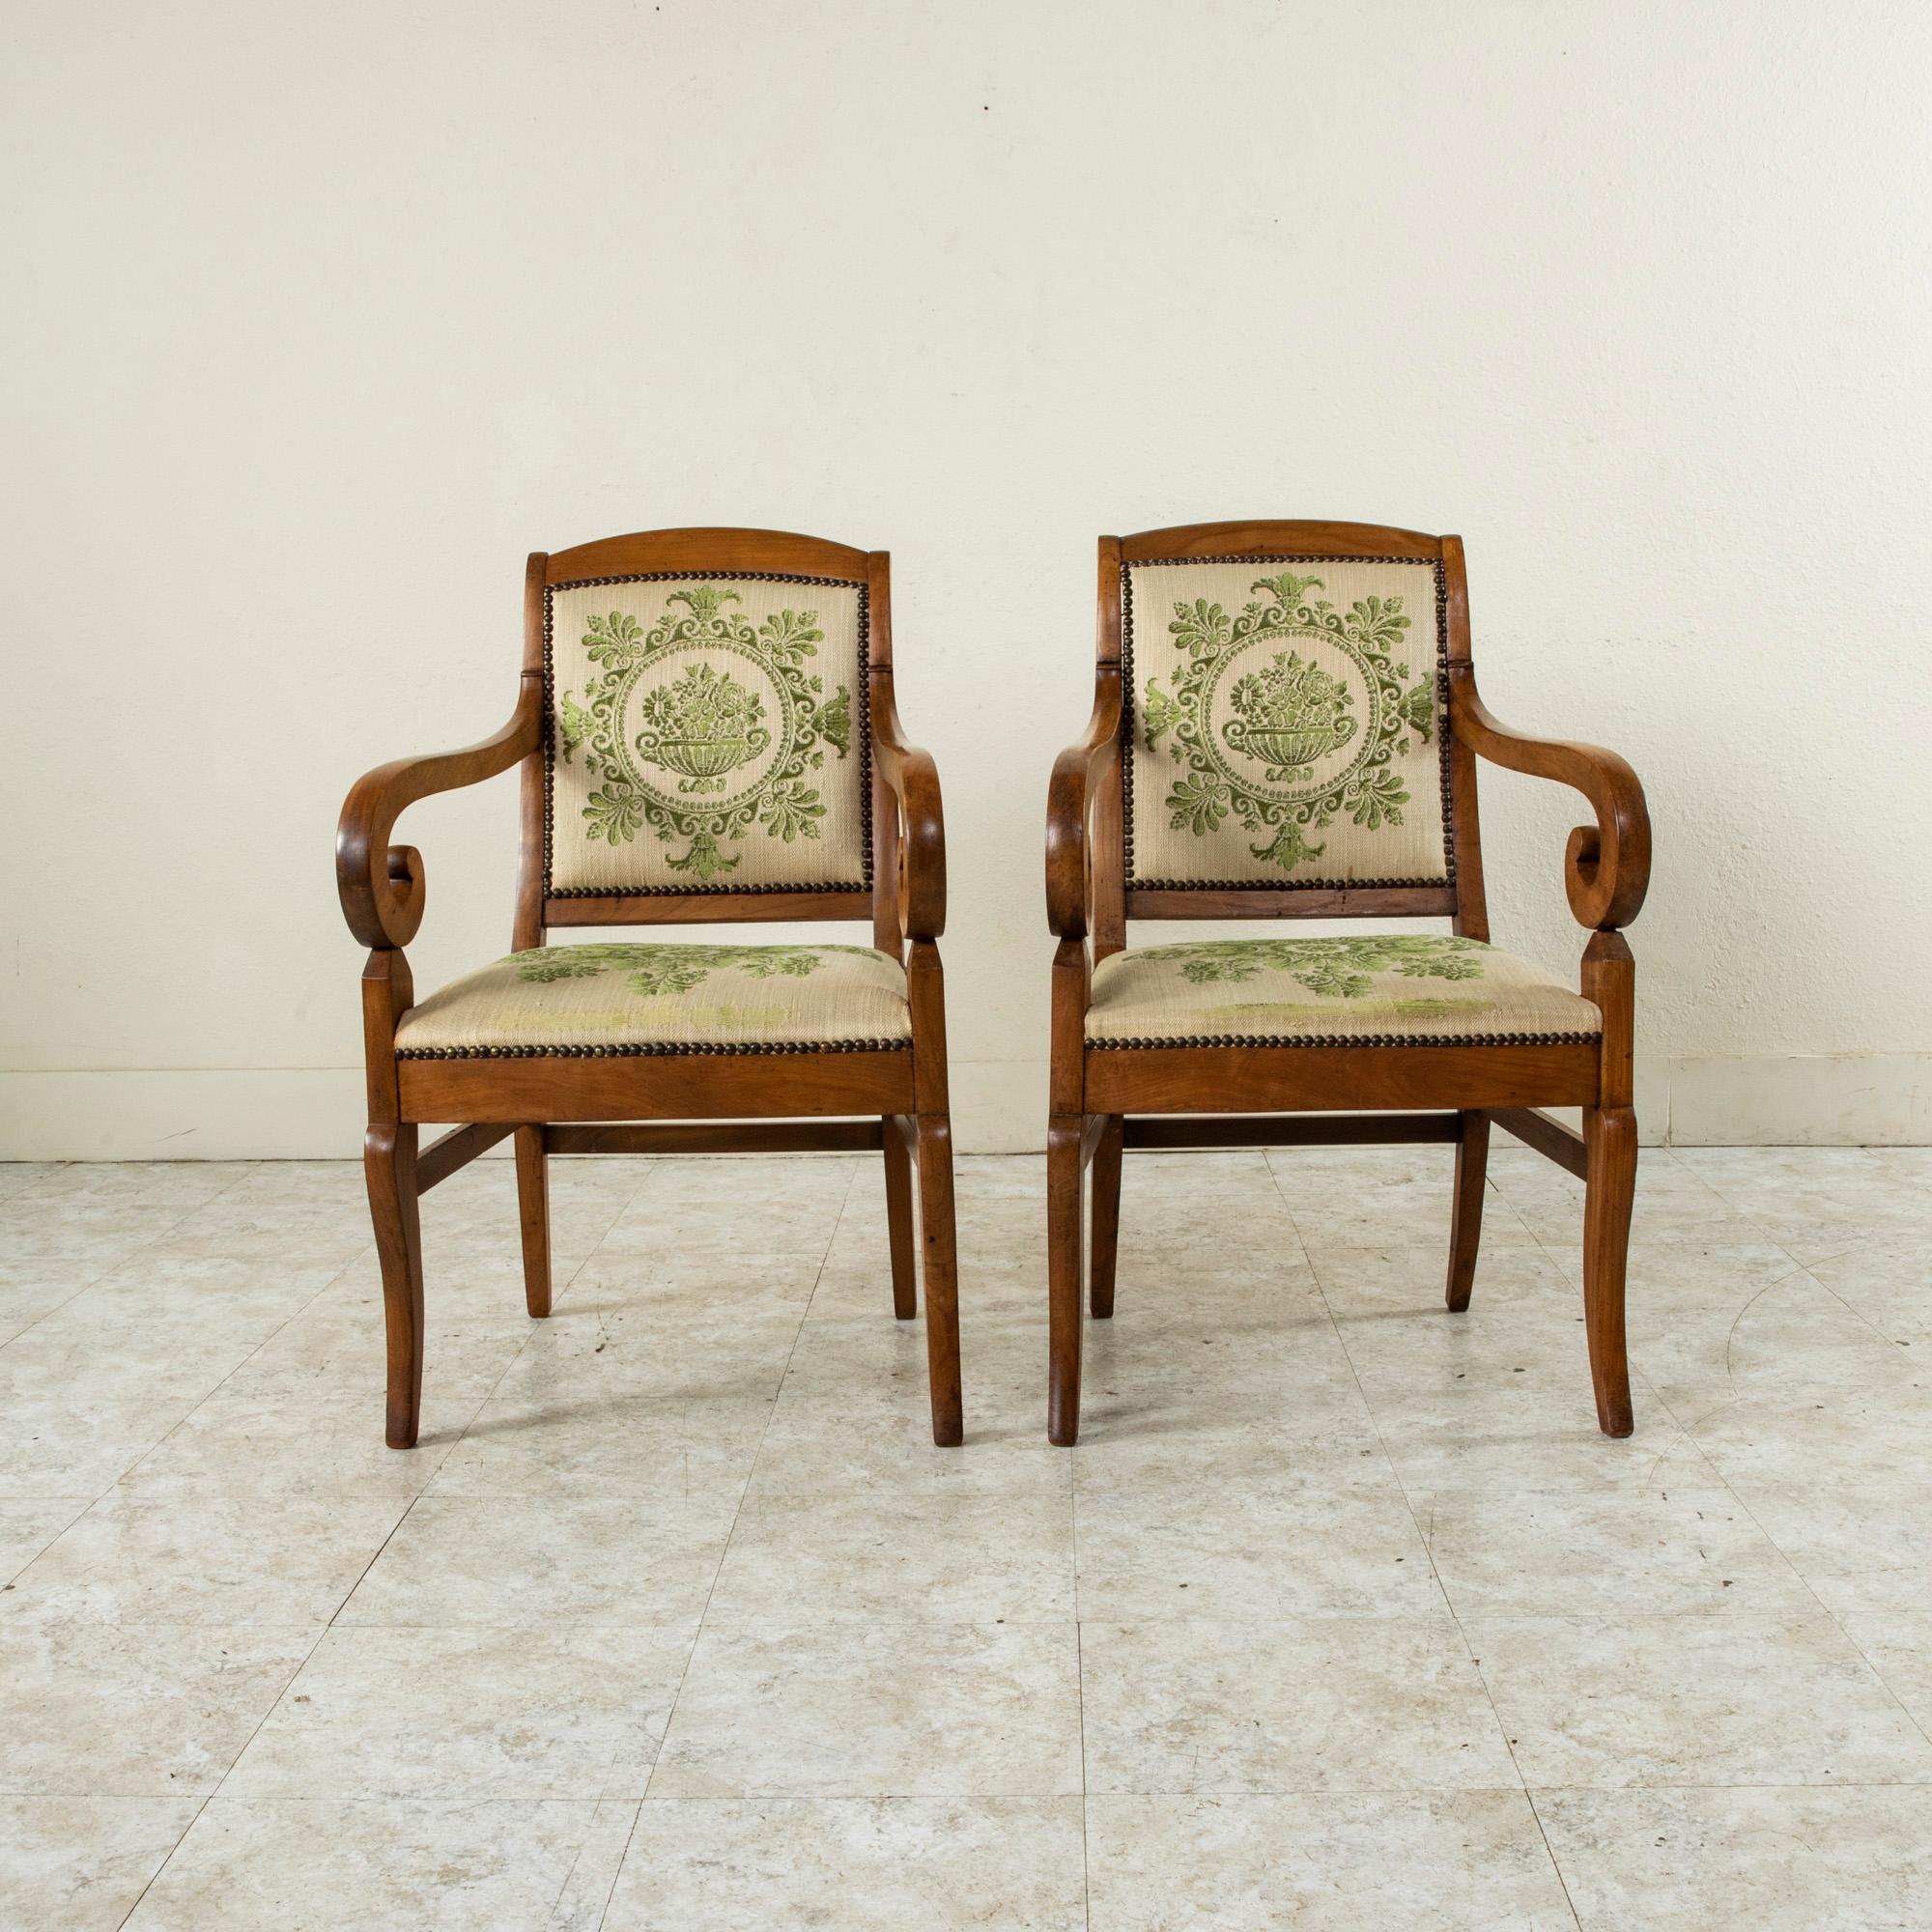 Embroidered Early 19th Century French Restauration Period Elm Armchairs with Urn Motif For Sale